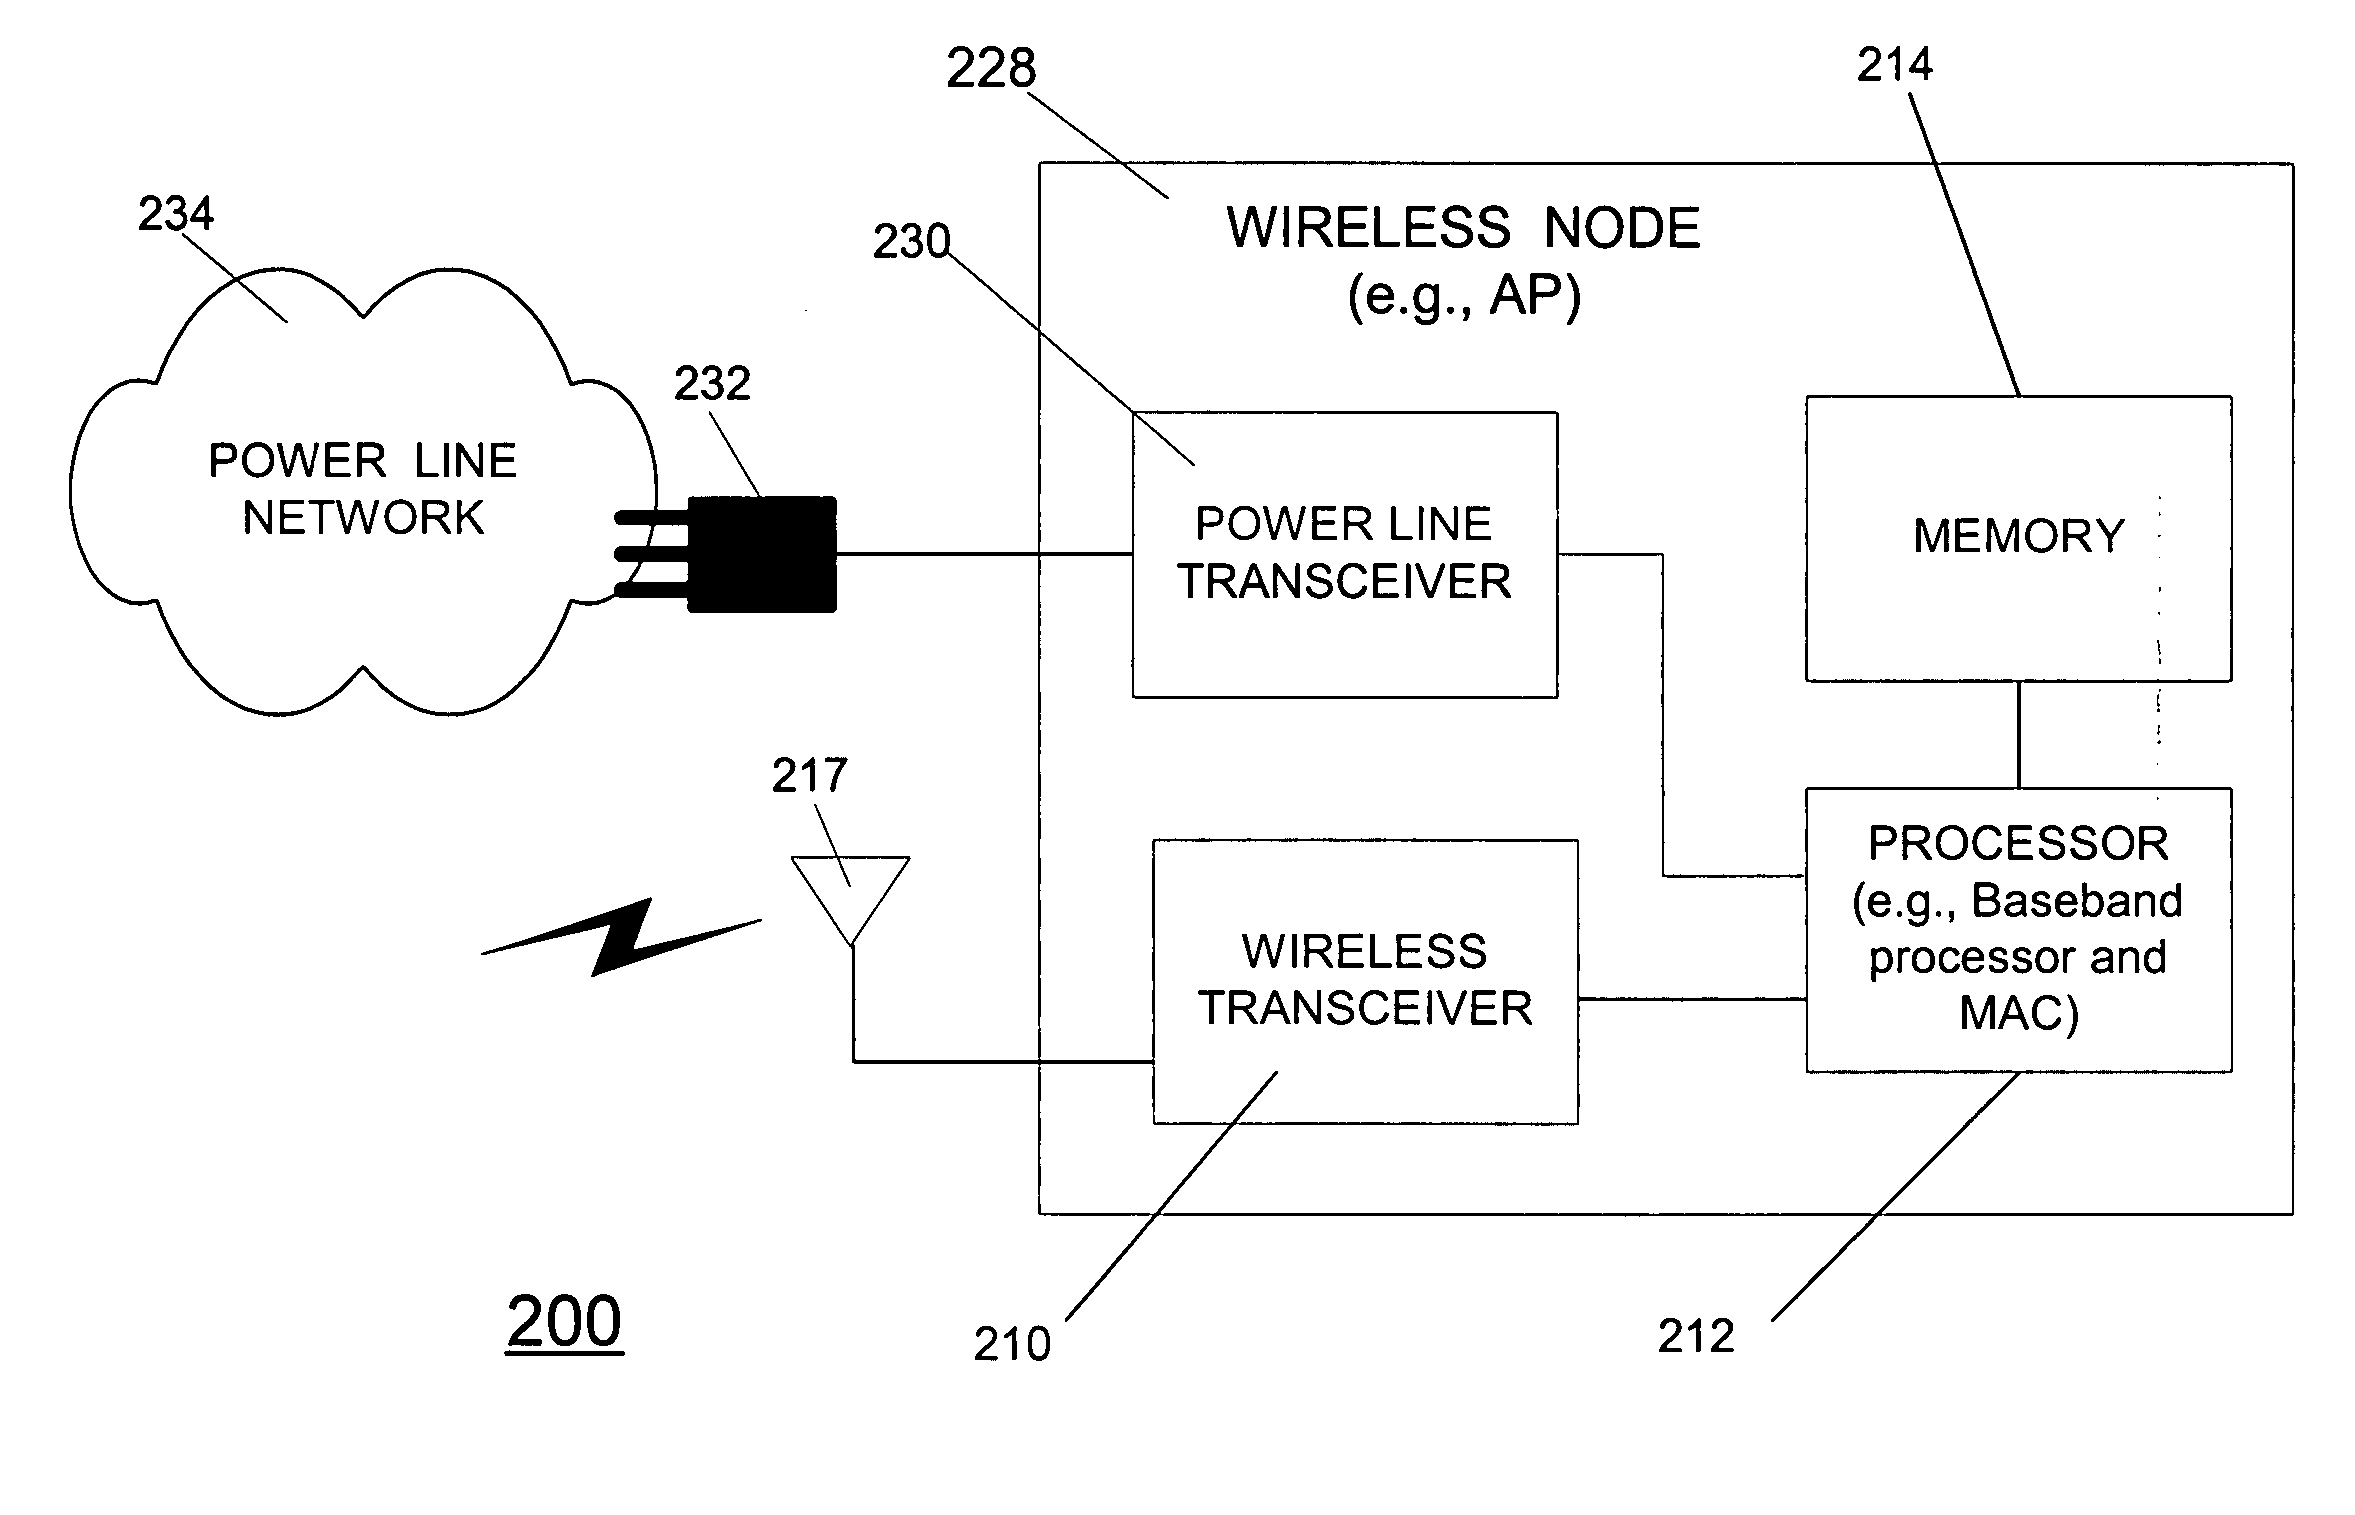 Technique to coordinate wireless network over a power line or other wired back channel